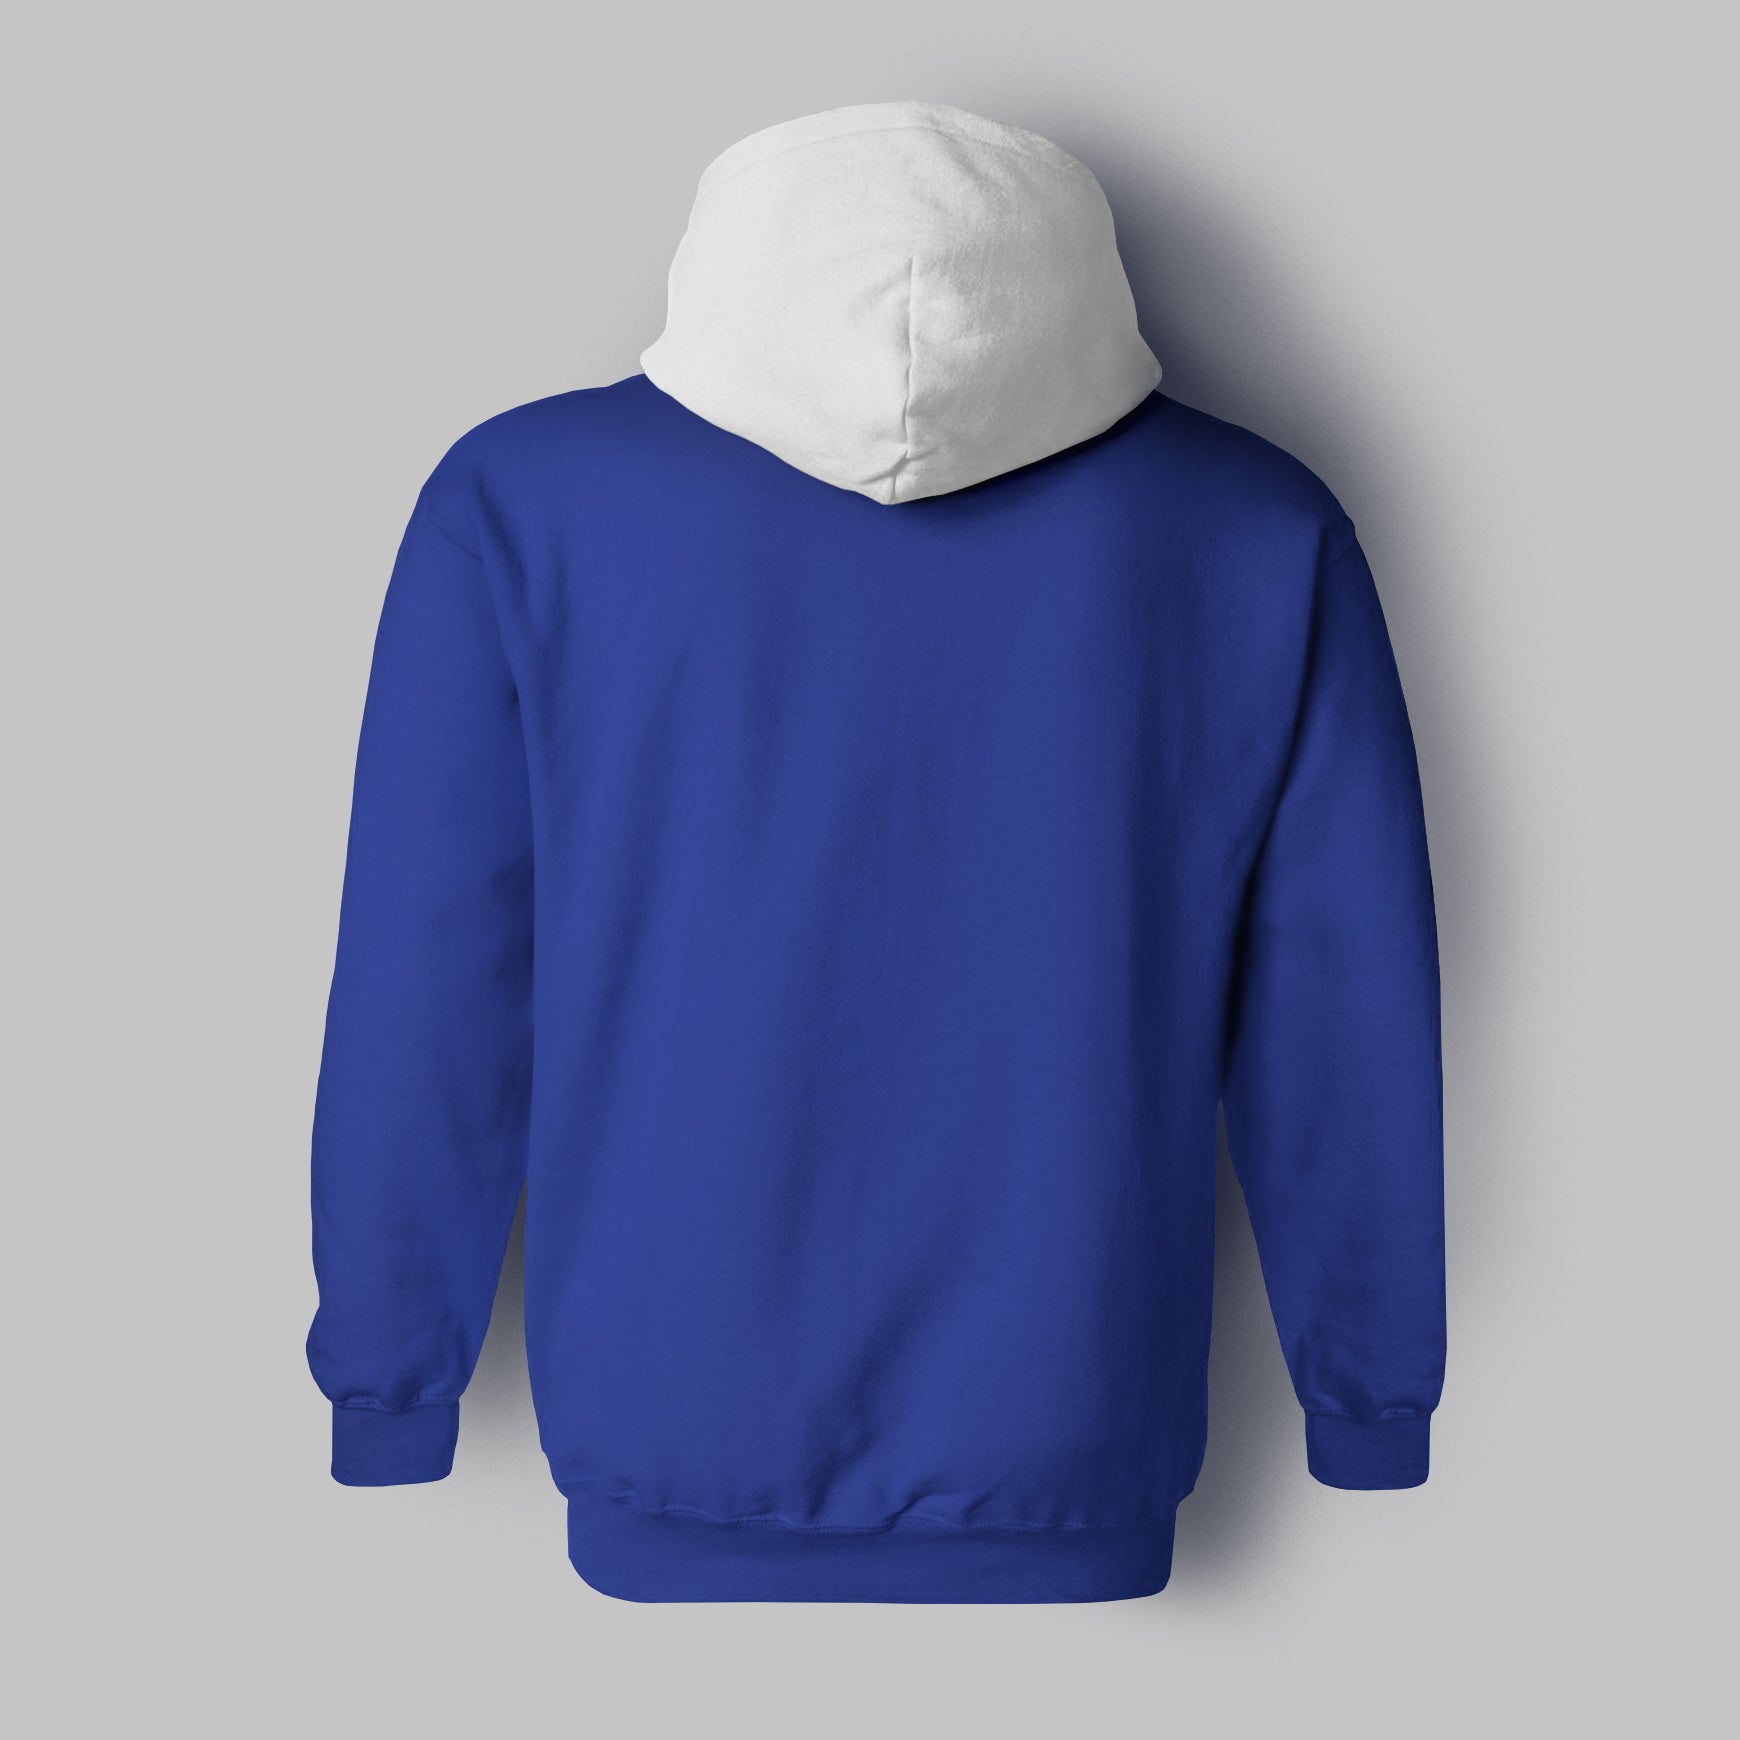 Download TheApparelGuy - Pullover Hoodie Mock Up